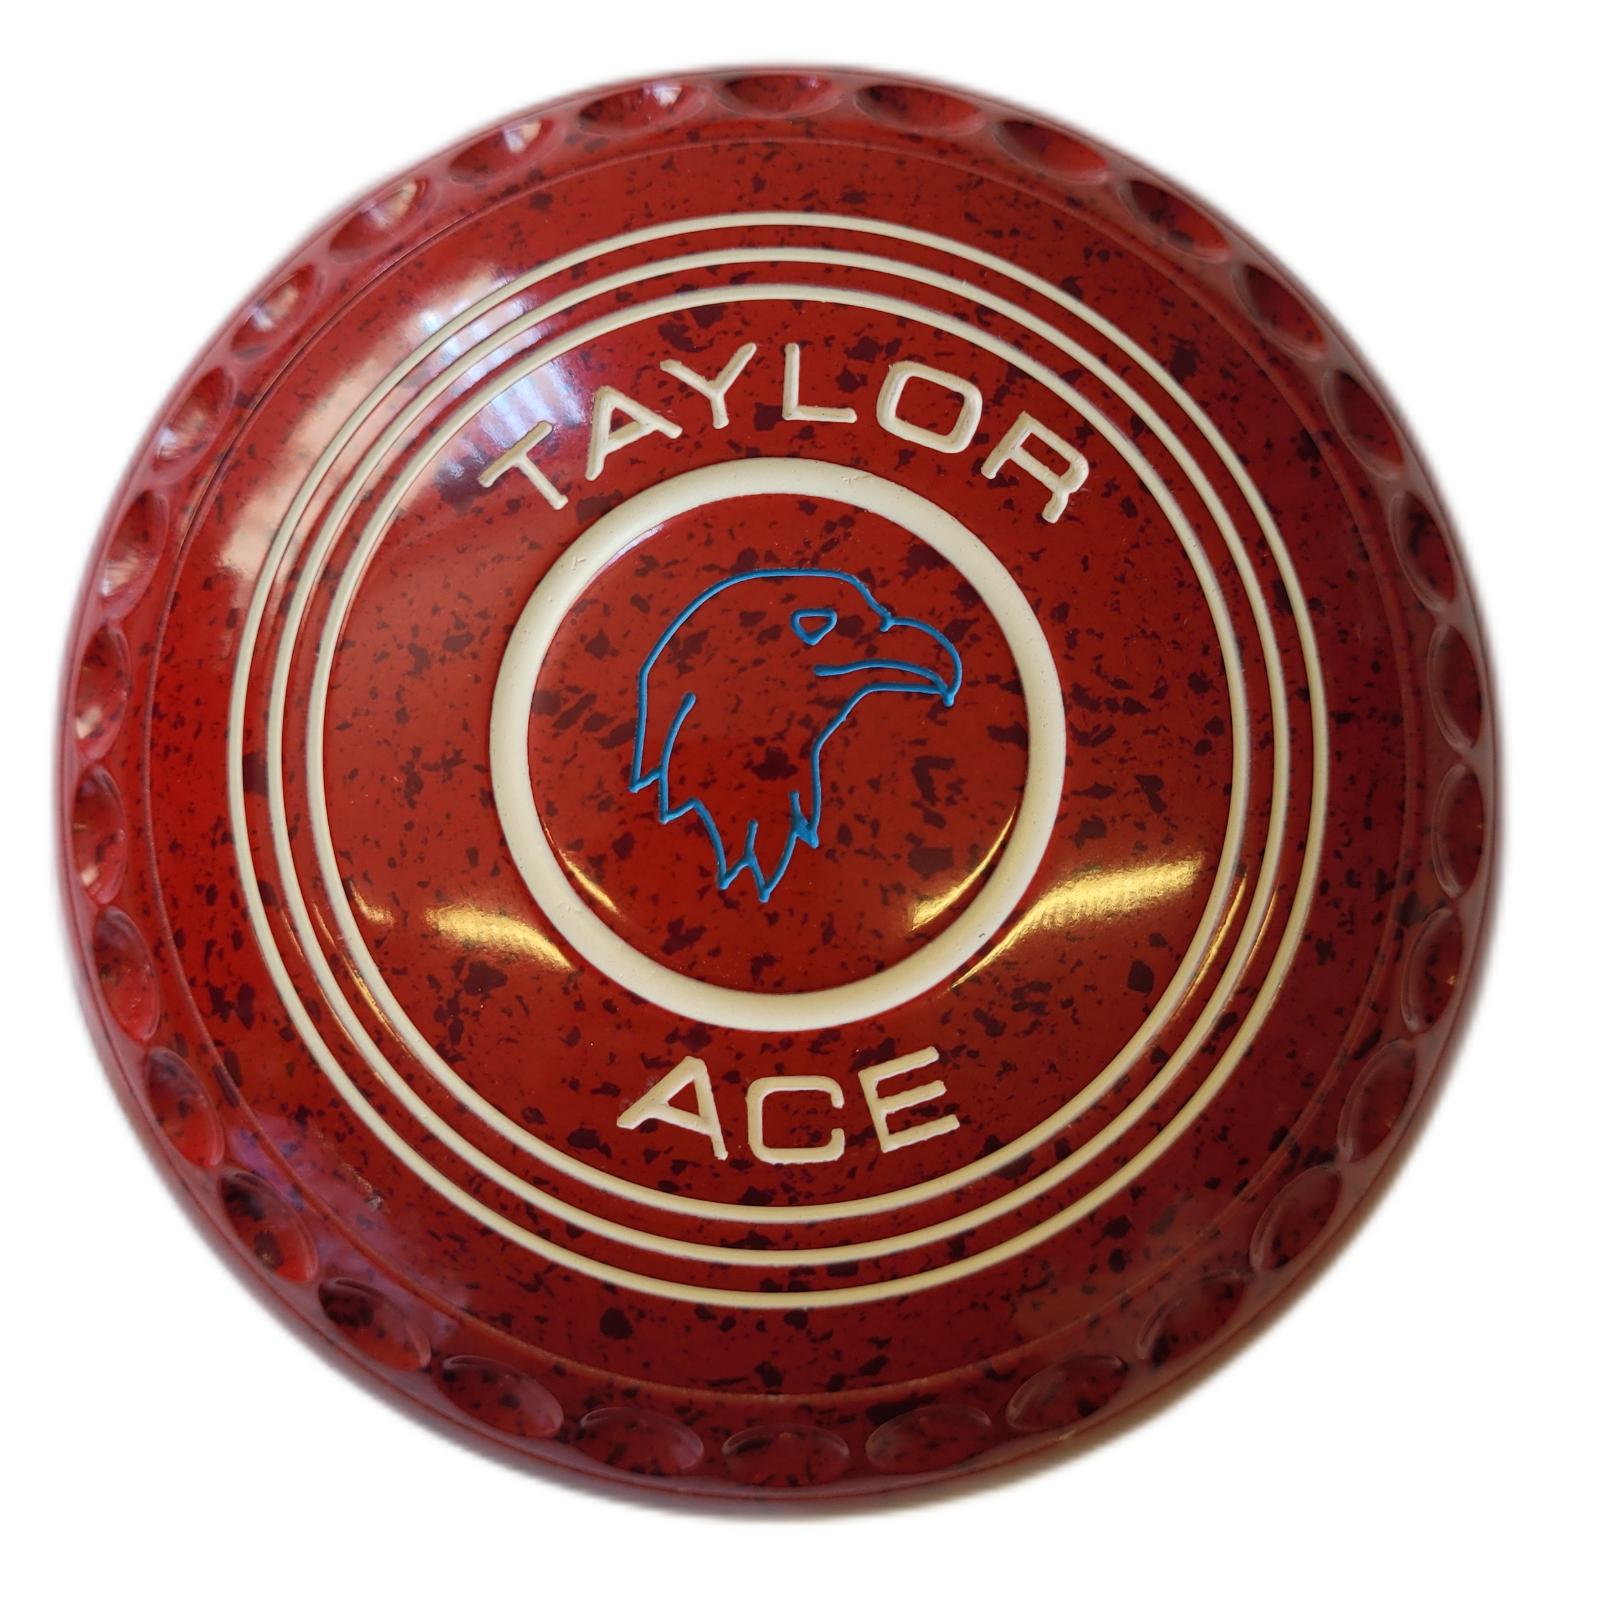 Taylor Ace size 1H Cherry Red progrip